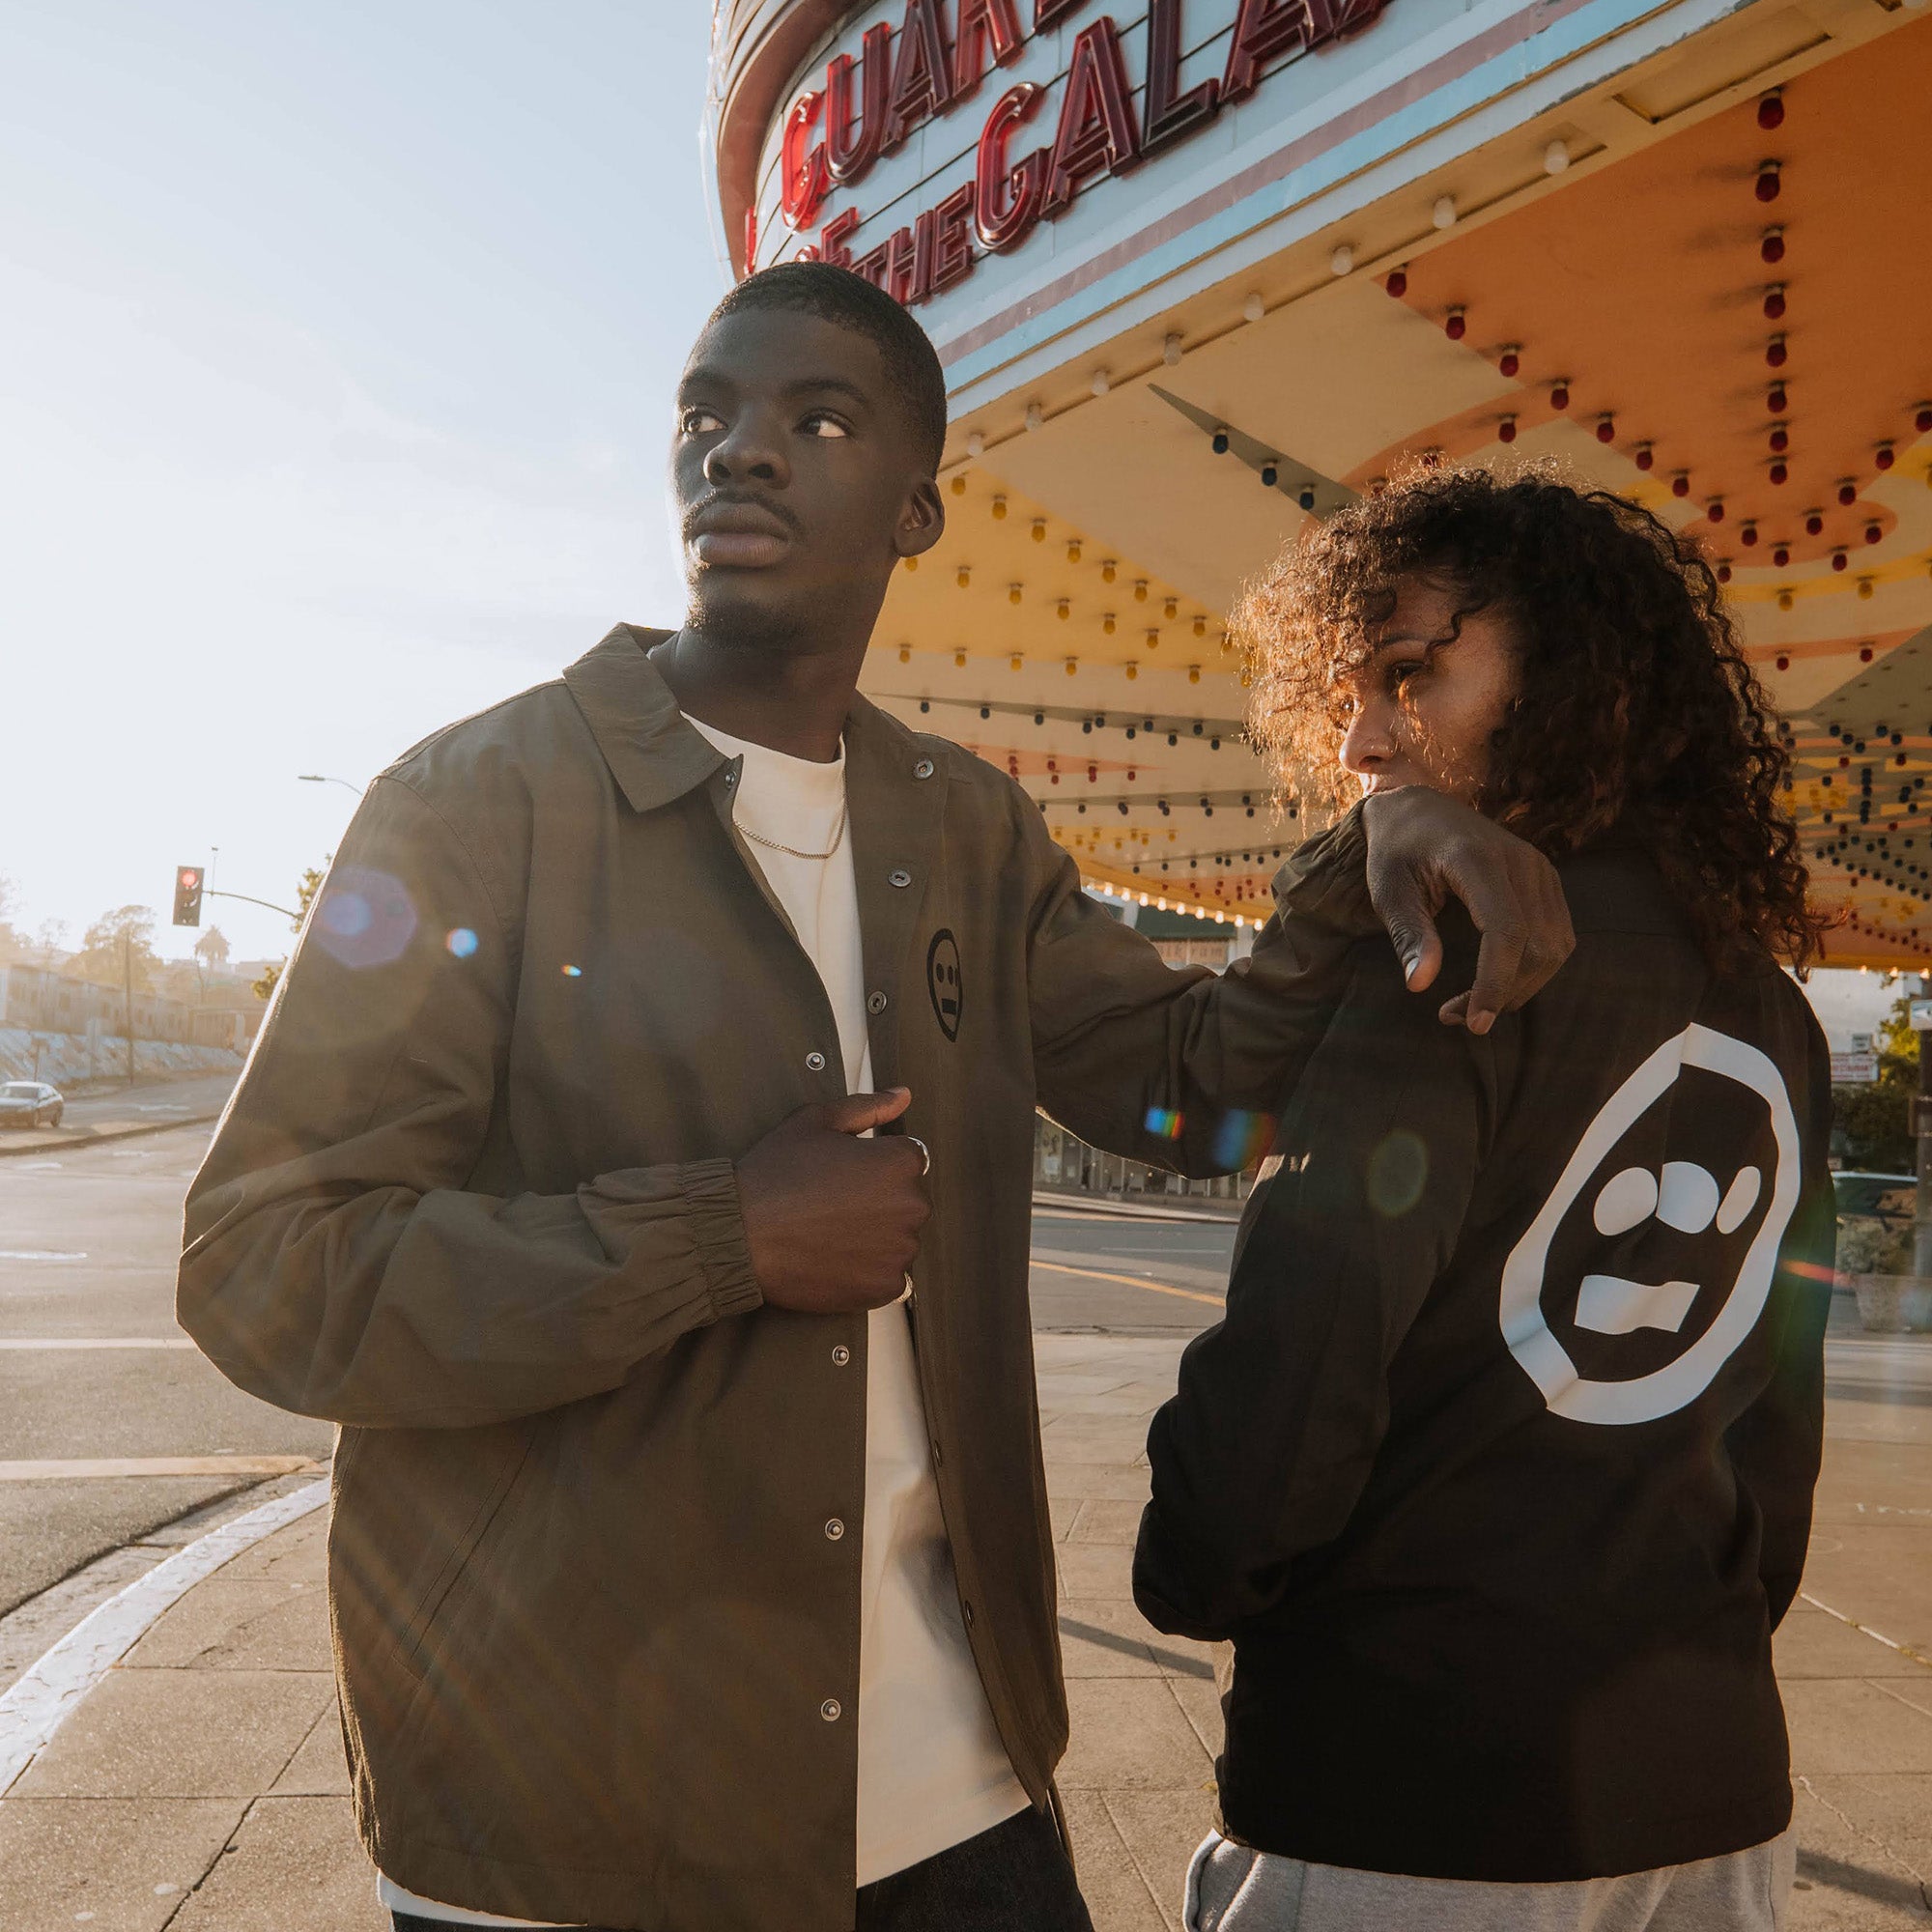 Male and female model near movie marquee with male wearing olive jacket with black left chest hiero logo and female model wearing black jacket with large hiero logo on back.